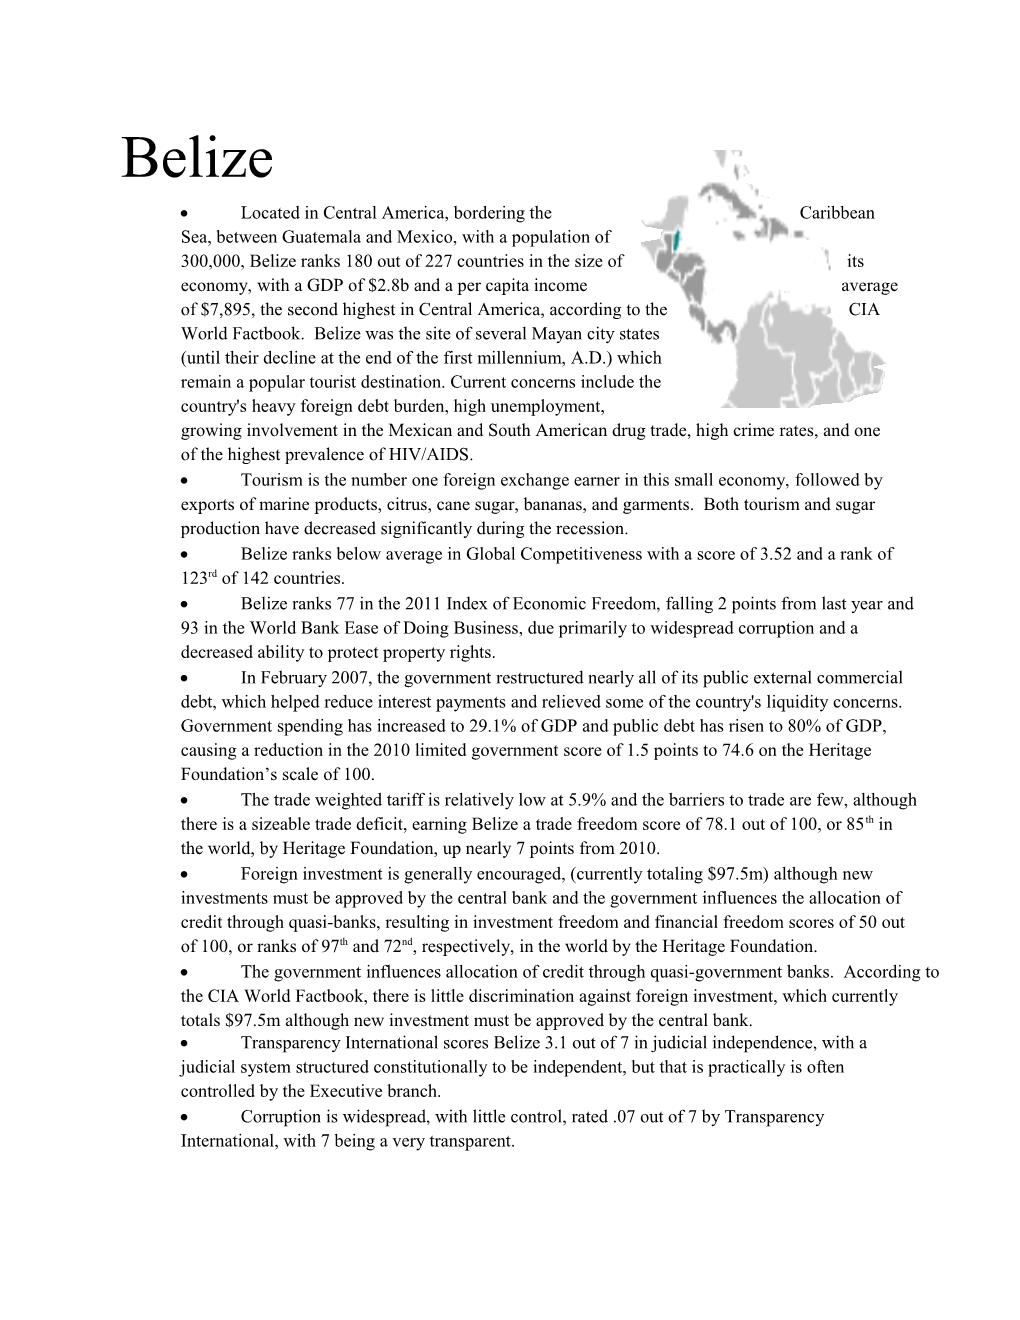 Belize Ranks Below Average in Global Competitiveness with a Score of 3.52 and a Rank Of